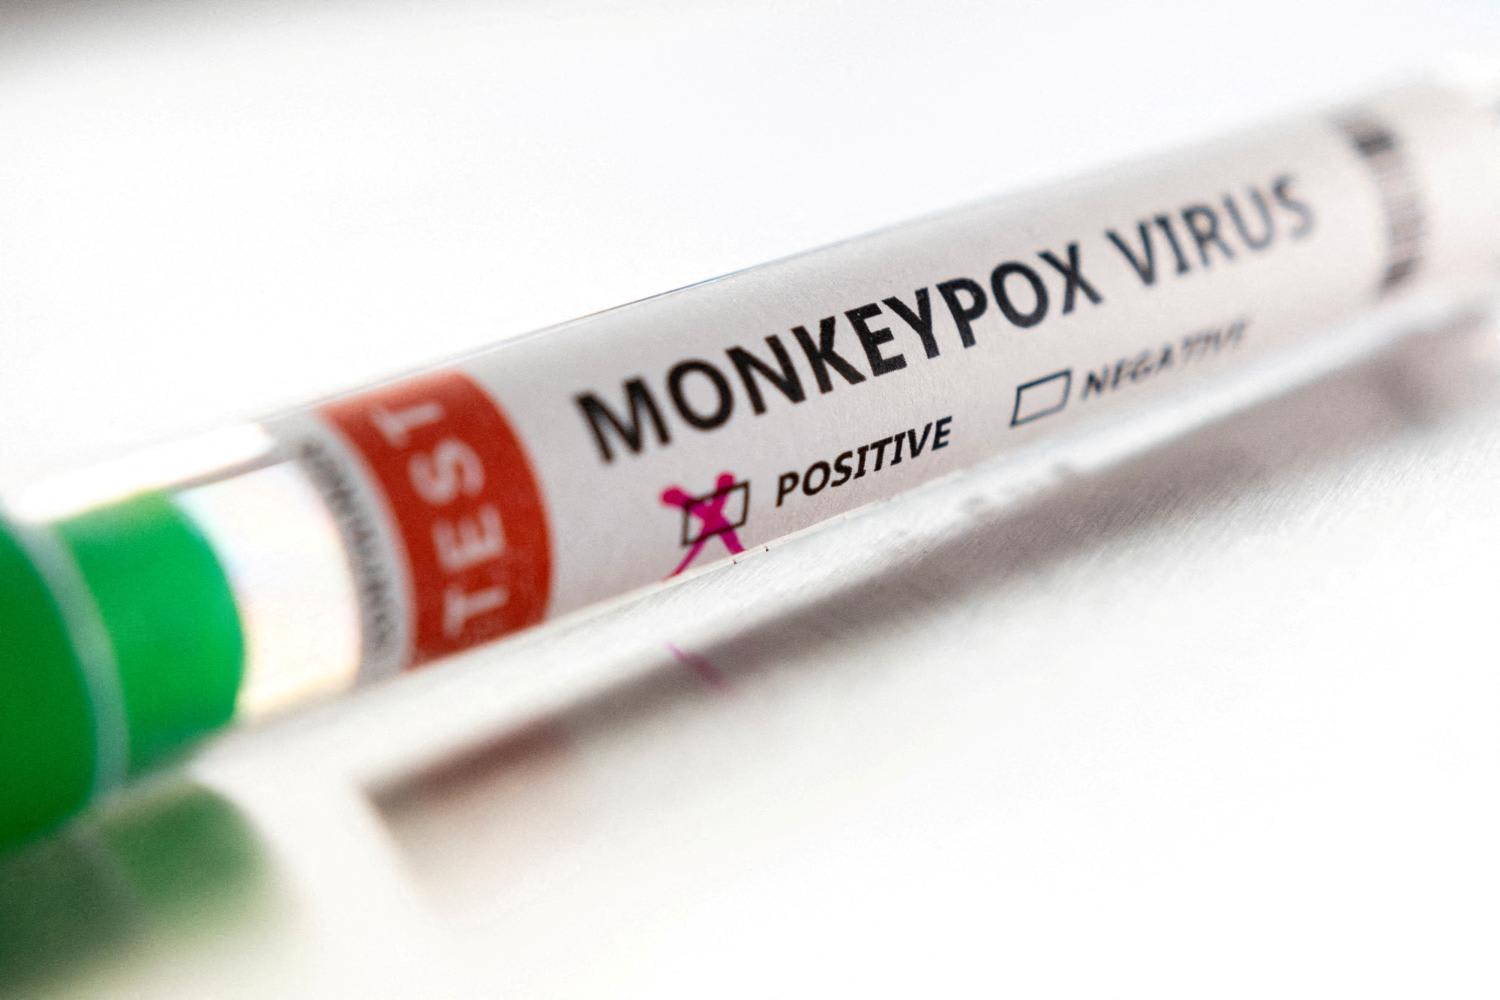 South Korea has designated monkeypox as a second-degree infectious disease, according to its four-tier system, with 22 contagious diseases including Covid-19, cholera and chickenpox being included in the same category.